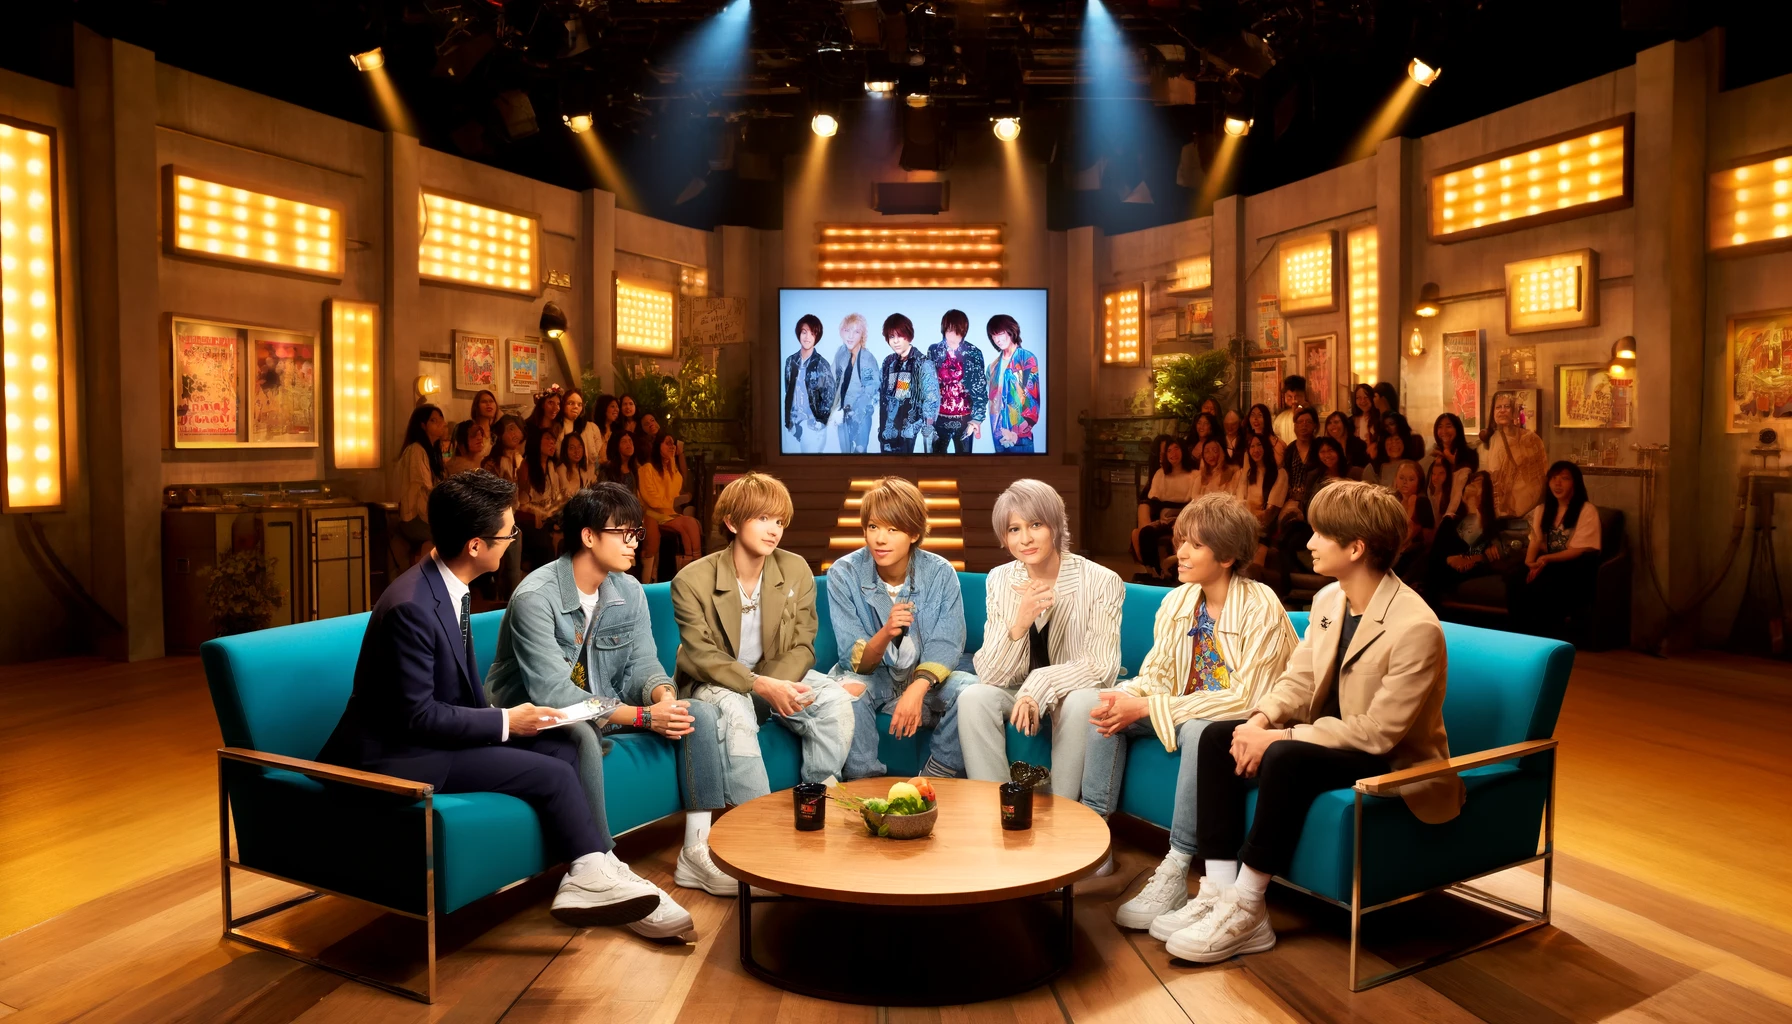 A scene depicting a popular Japanese male idol group appearing on a television show. The setting is a modern TV studio with stylish, colorful decor. The group consists of four young men, each wearing trendy, casual outfits, sitting on a couch and engaging enthusiastically with the show's host at a nearby desk. Behind them, a large screen displays the group's name and clips from their music videos. The atmosphere is lively and friendly, with studio lights highlighting the vibrant setting.